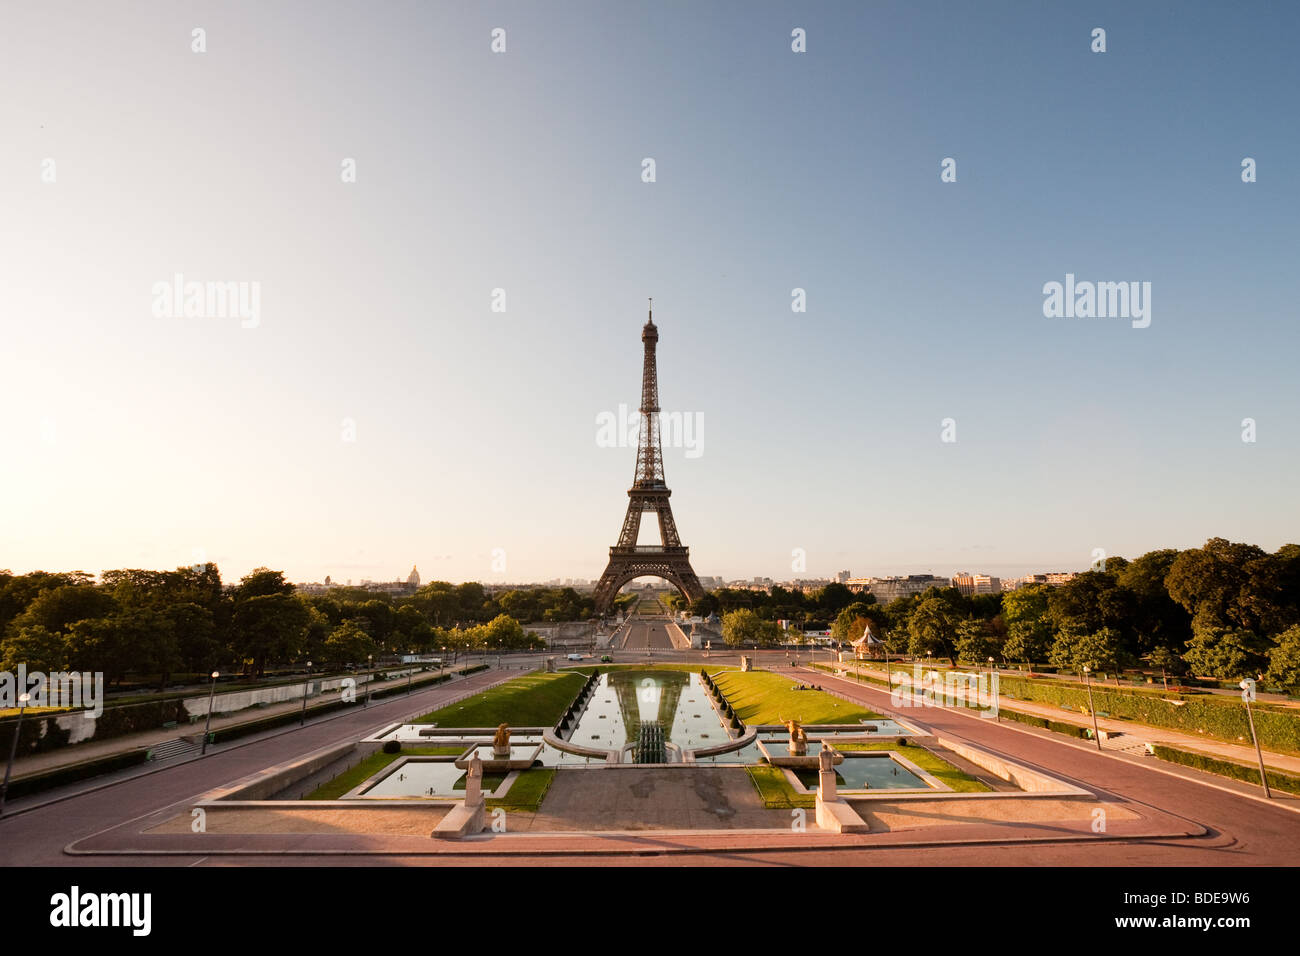 Eiffel tower with nearby square.as seen from Trocadero. Stock Photo